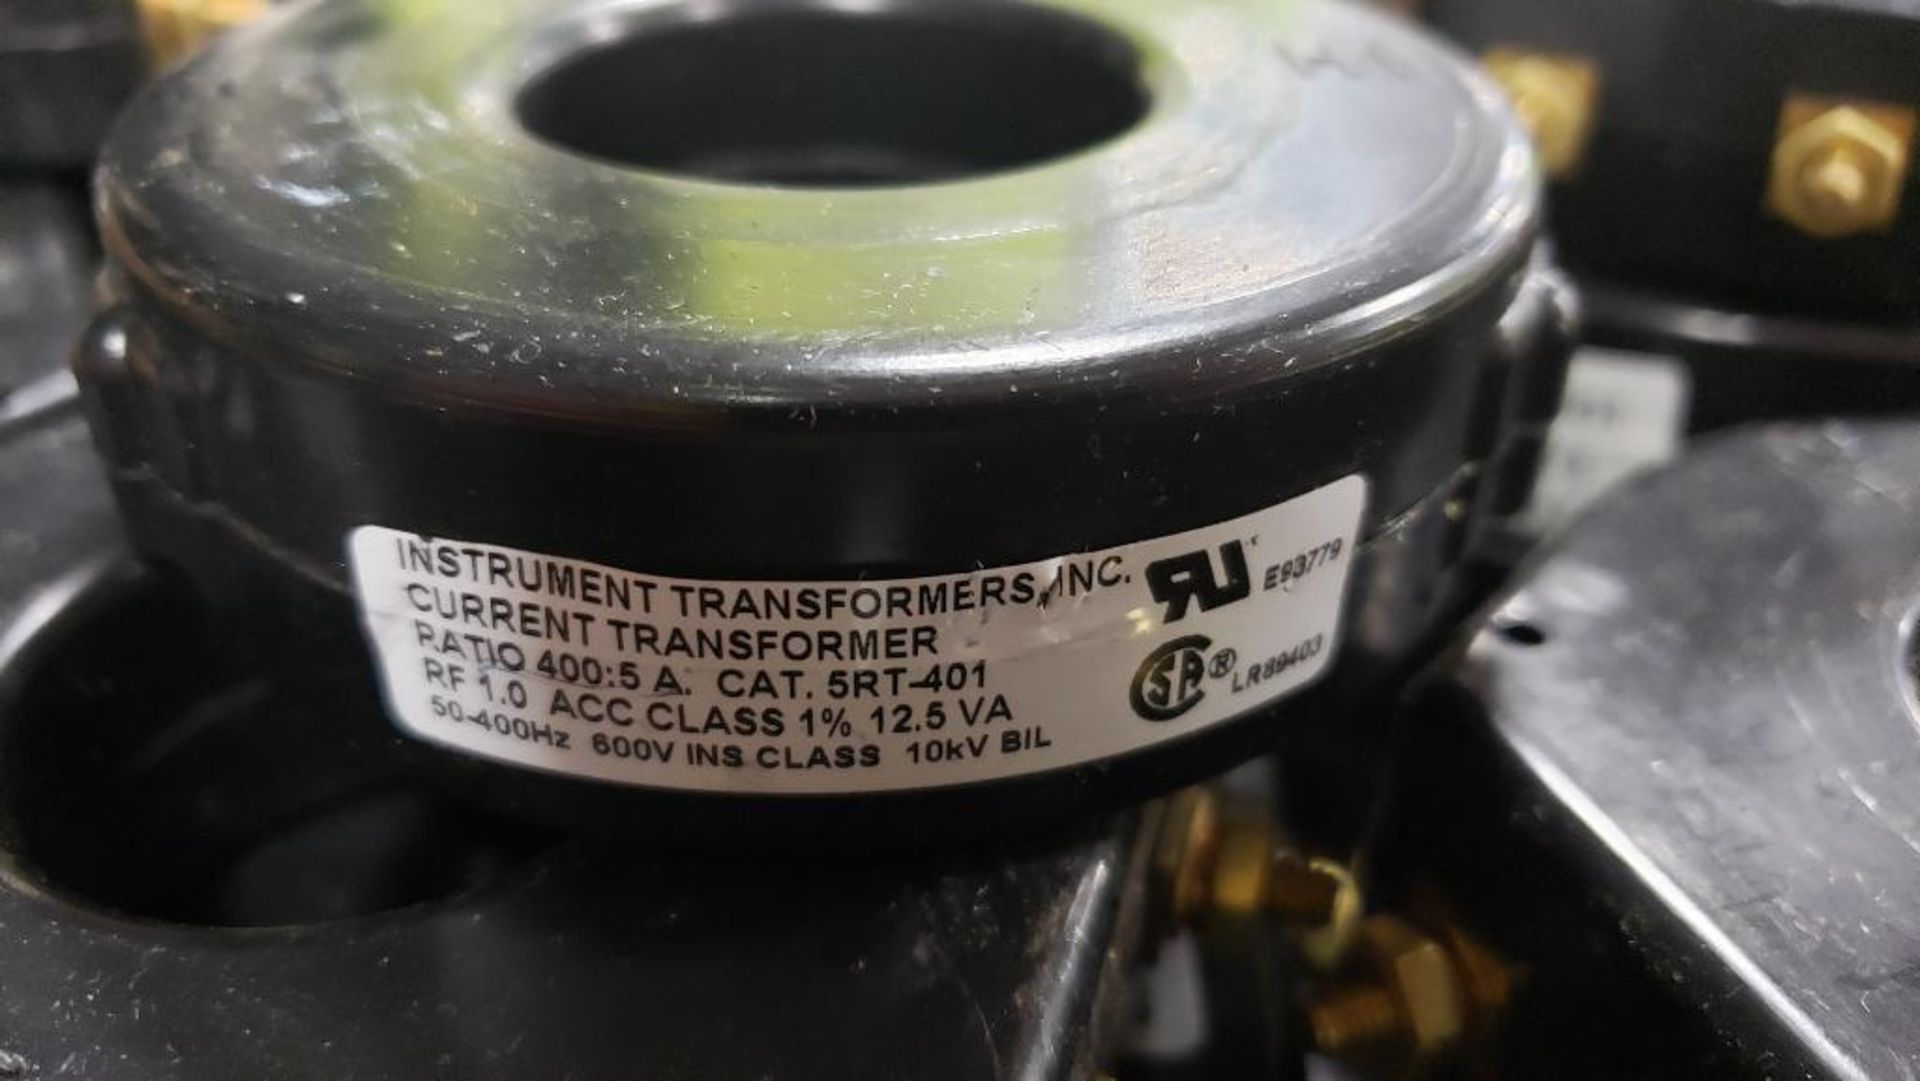 Qty 30 - Instrument Transormers. Catalog 5RT-401. New as pictured. - Image 2 of 2